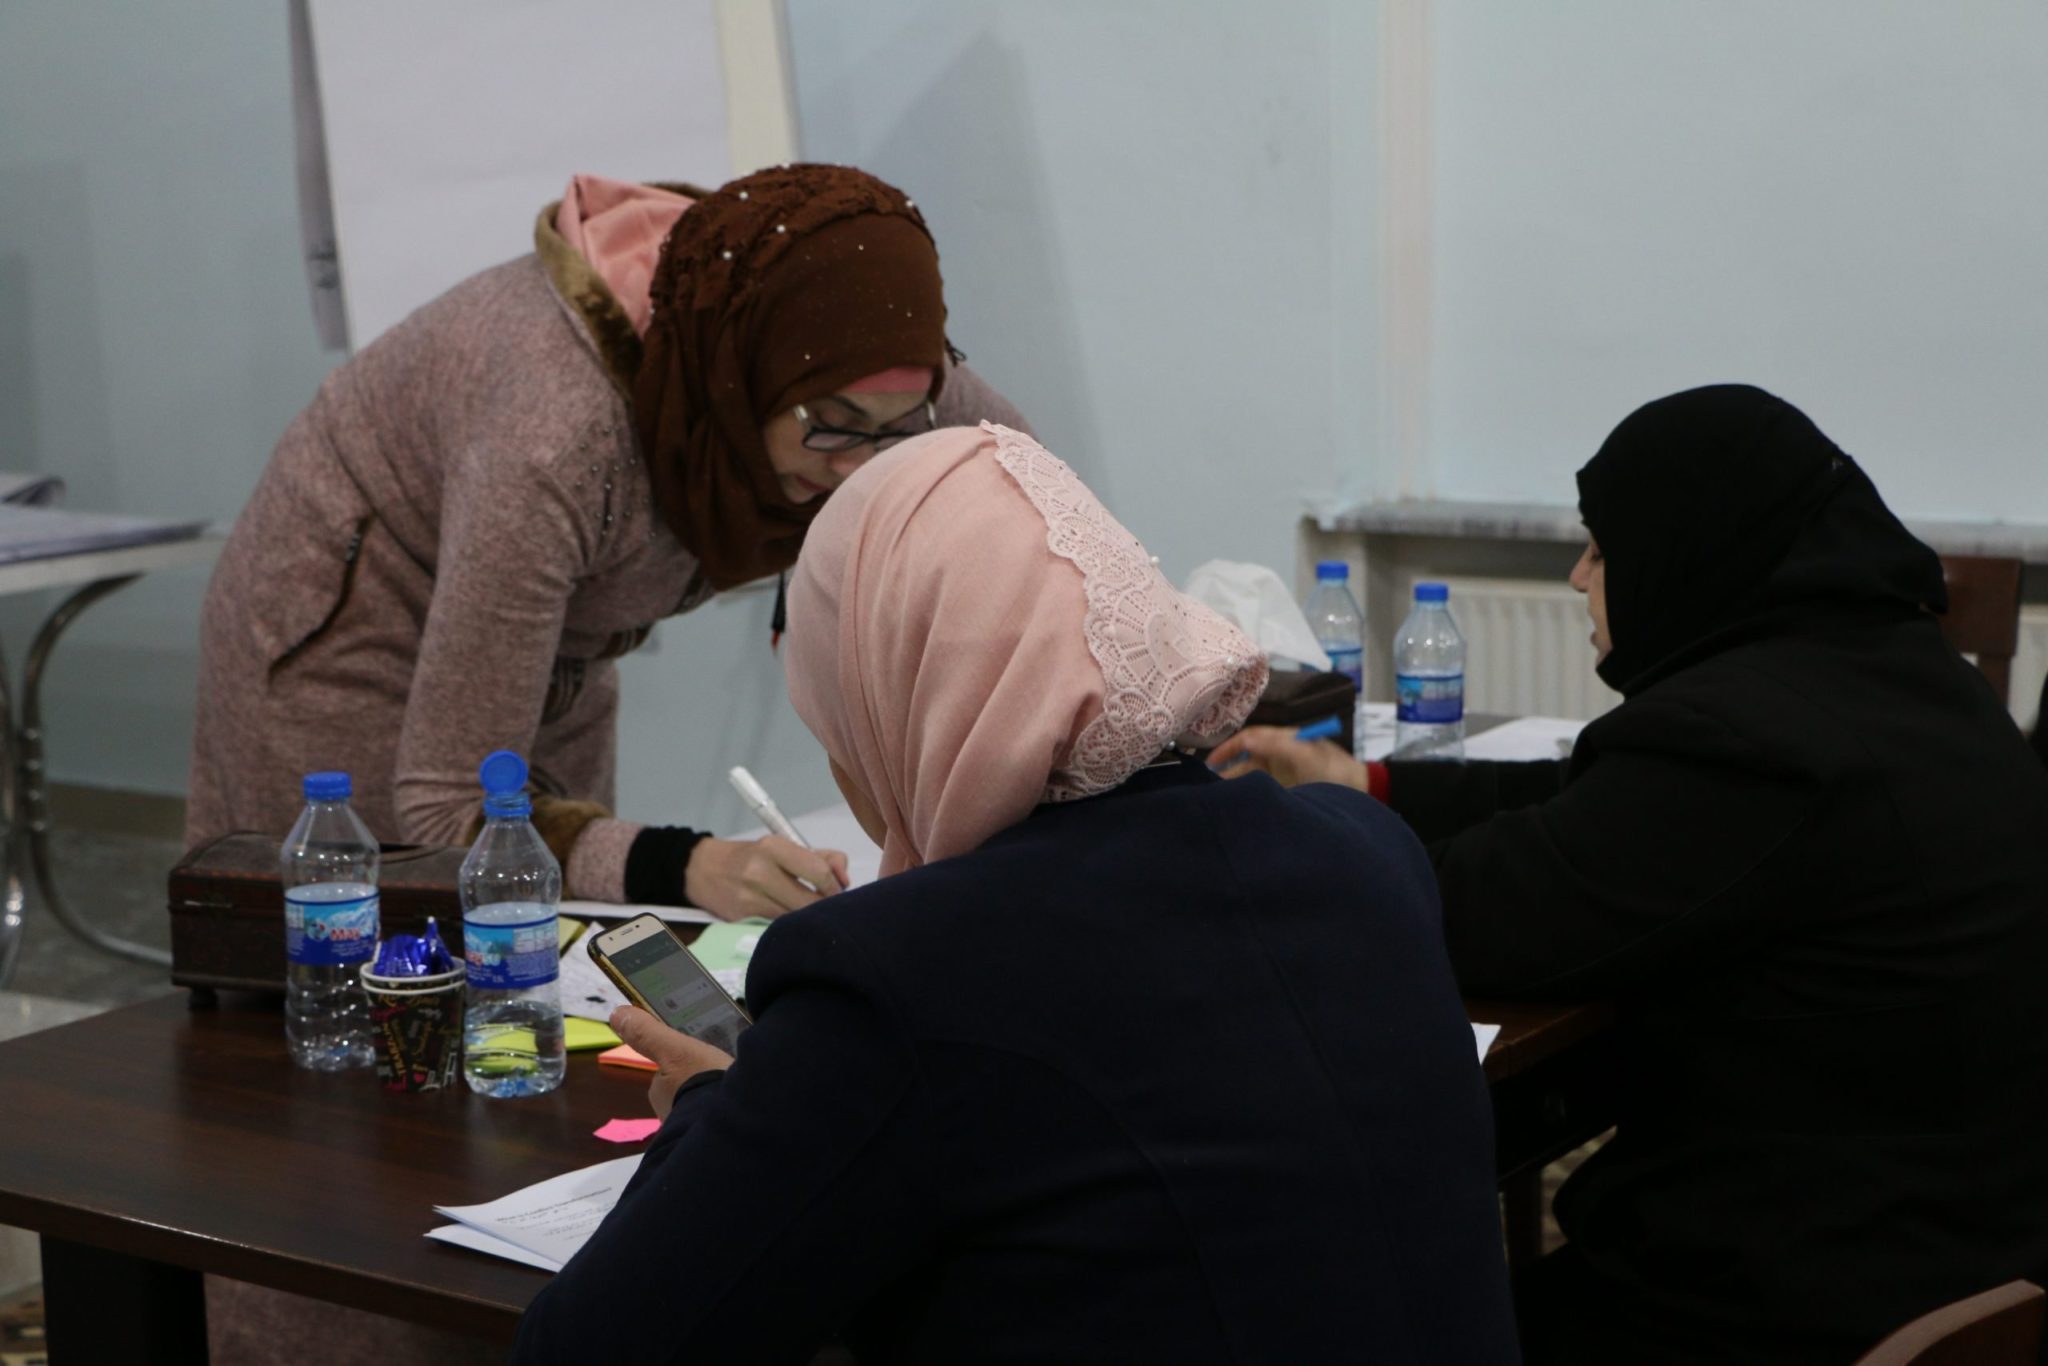 The Syrian women’s participation in politics